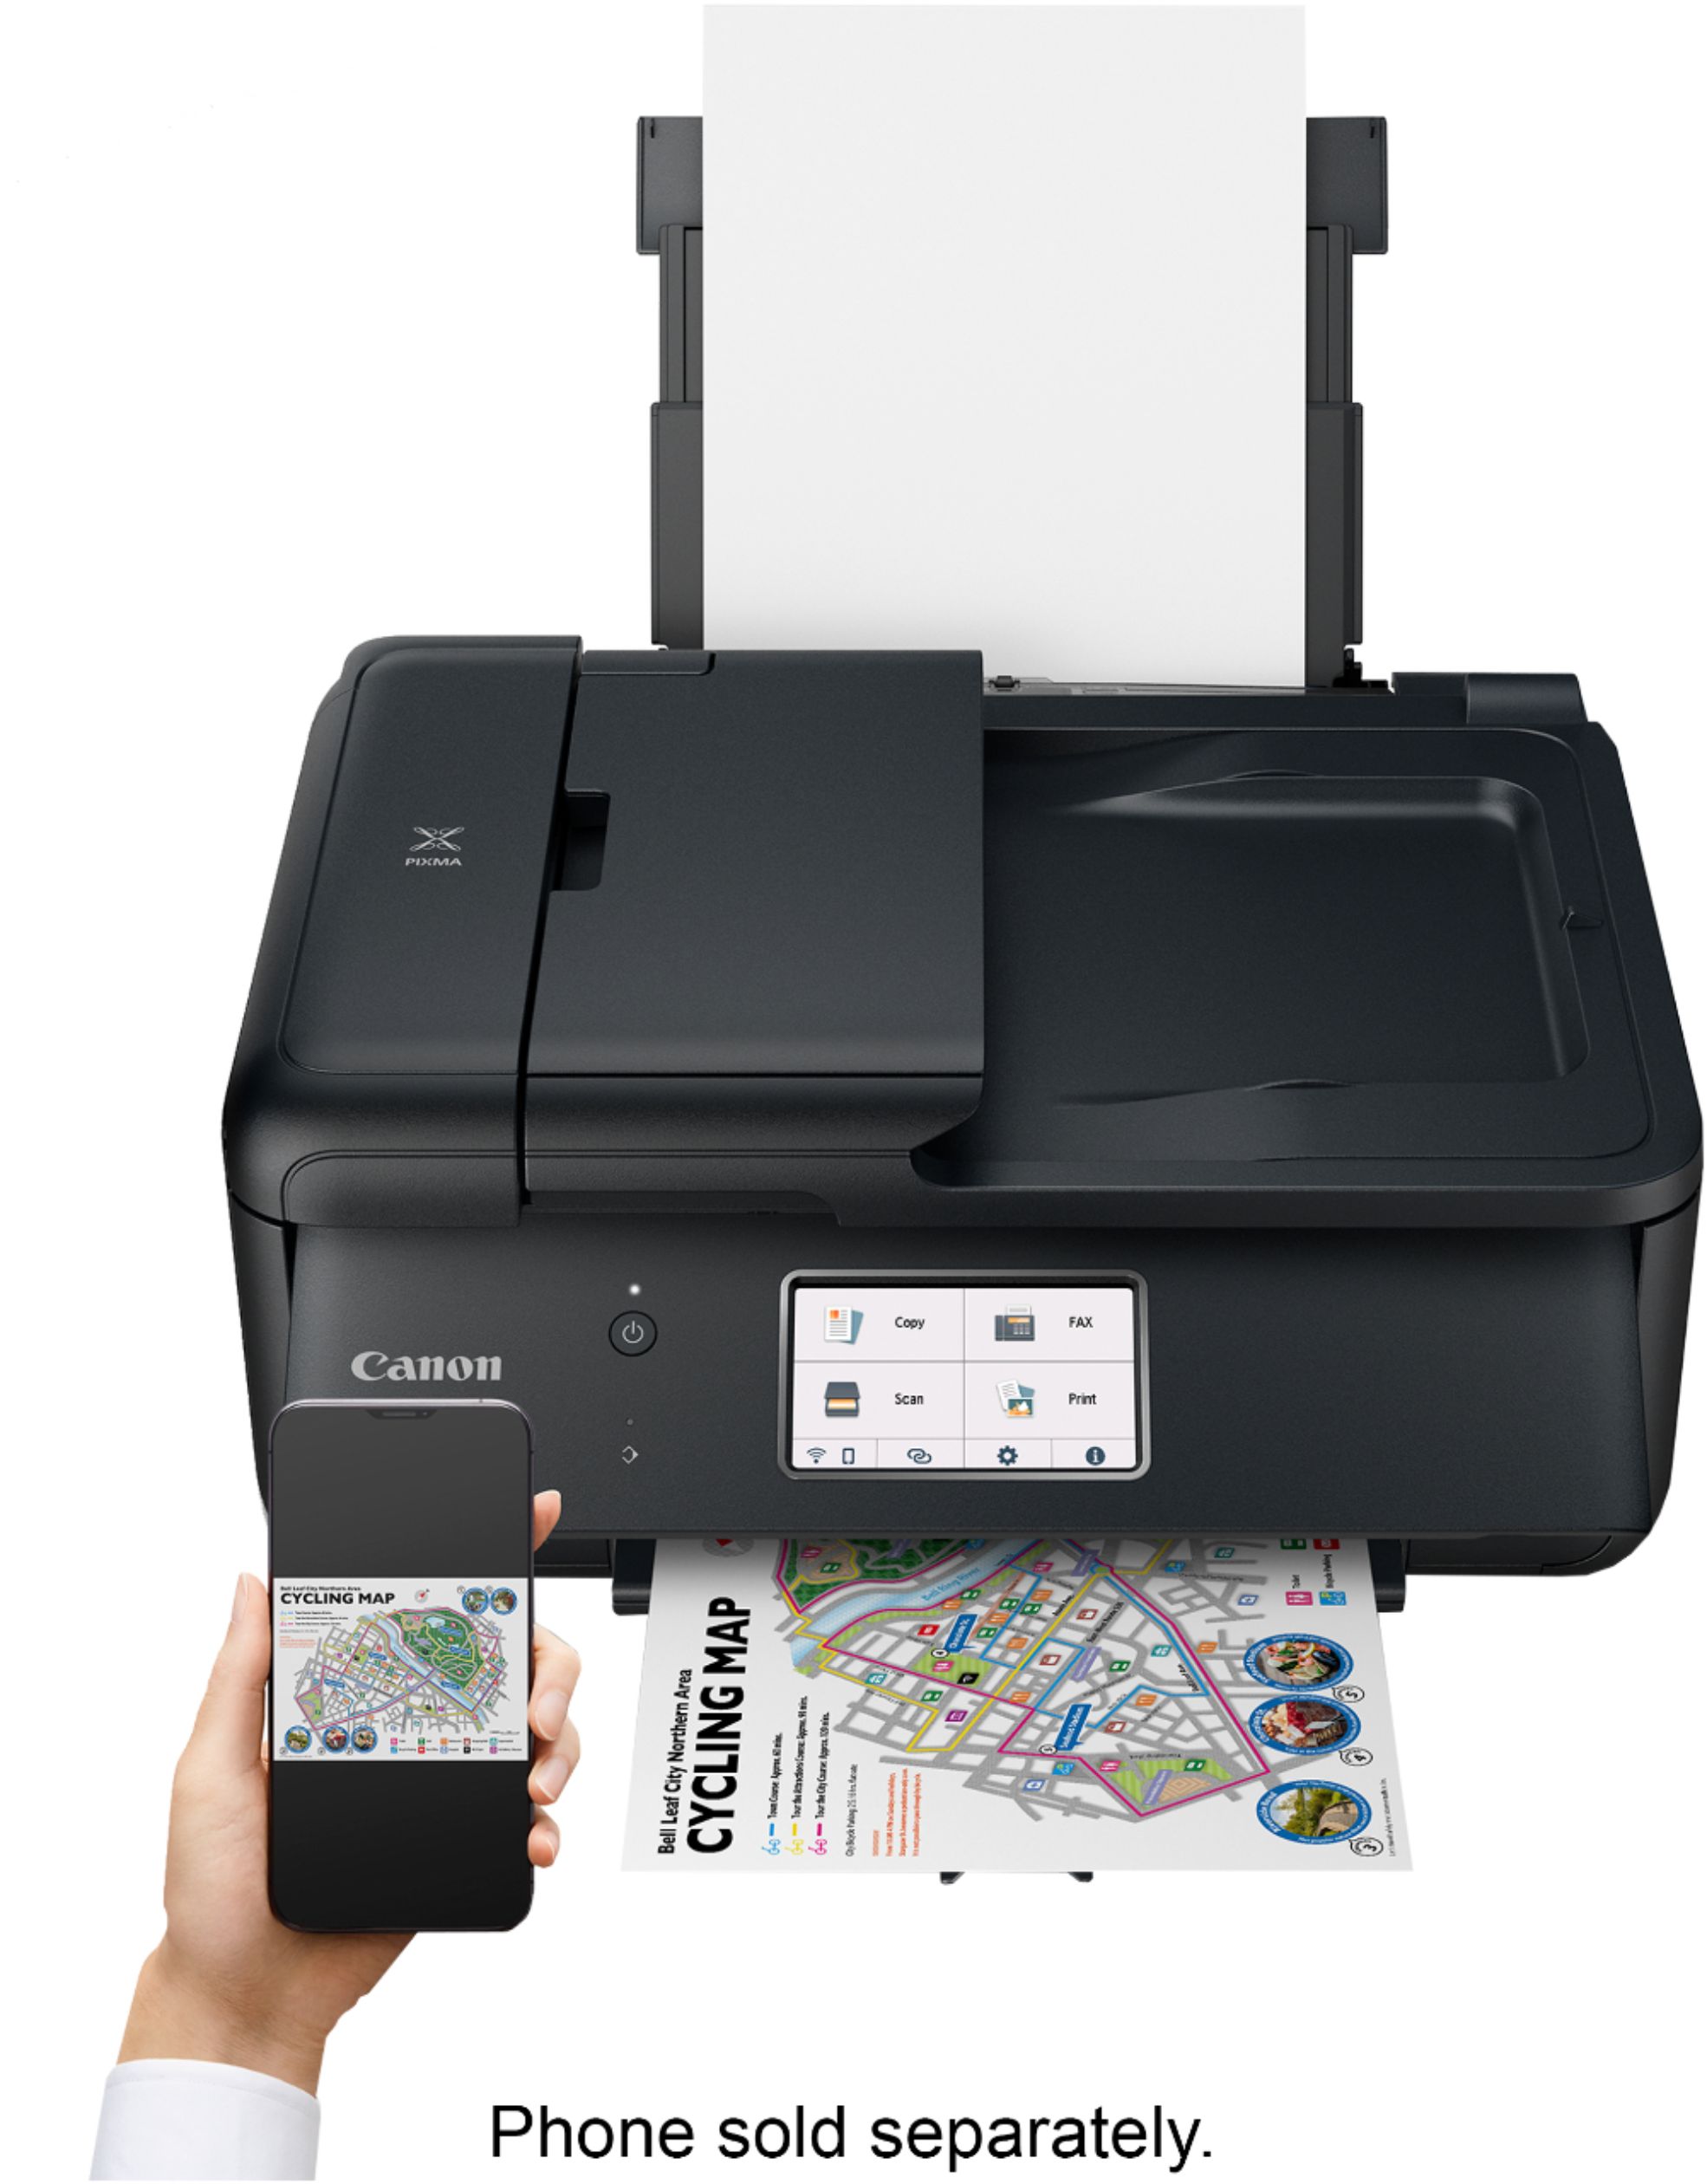 and Android Printing Photo and Document Printing Black Airprint Copier |Scanner| Fax |Auto Document Feeder Canon TR8620 All-in-One Printer for Home Office R